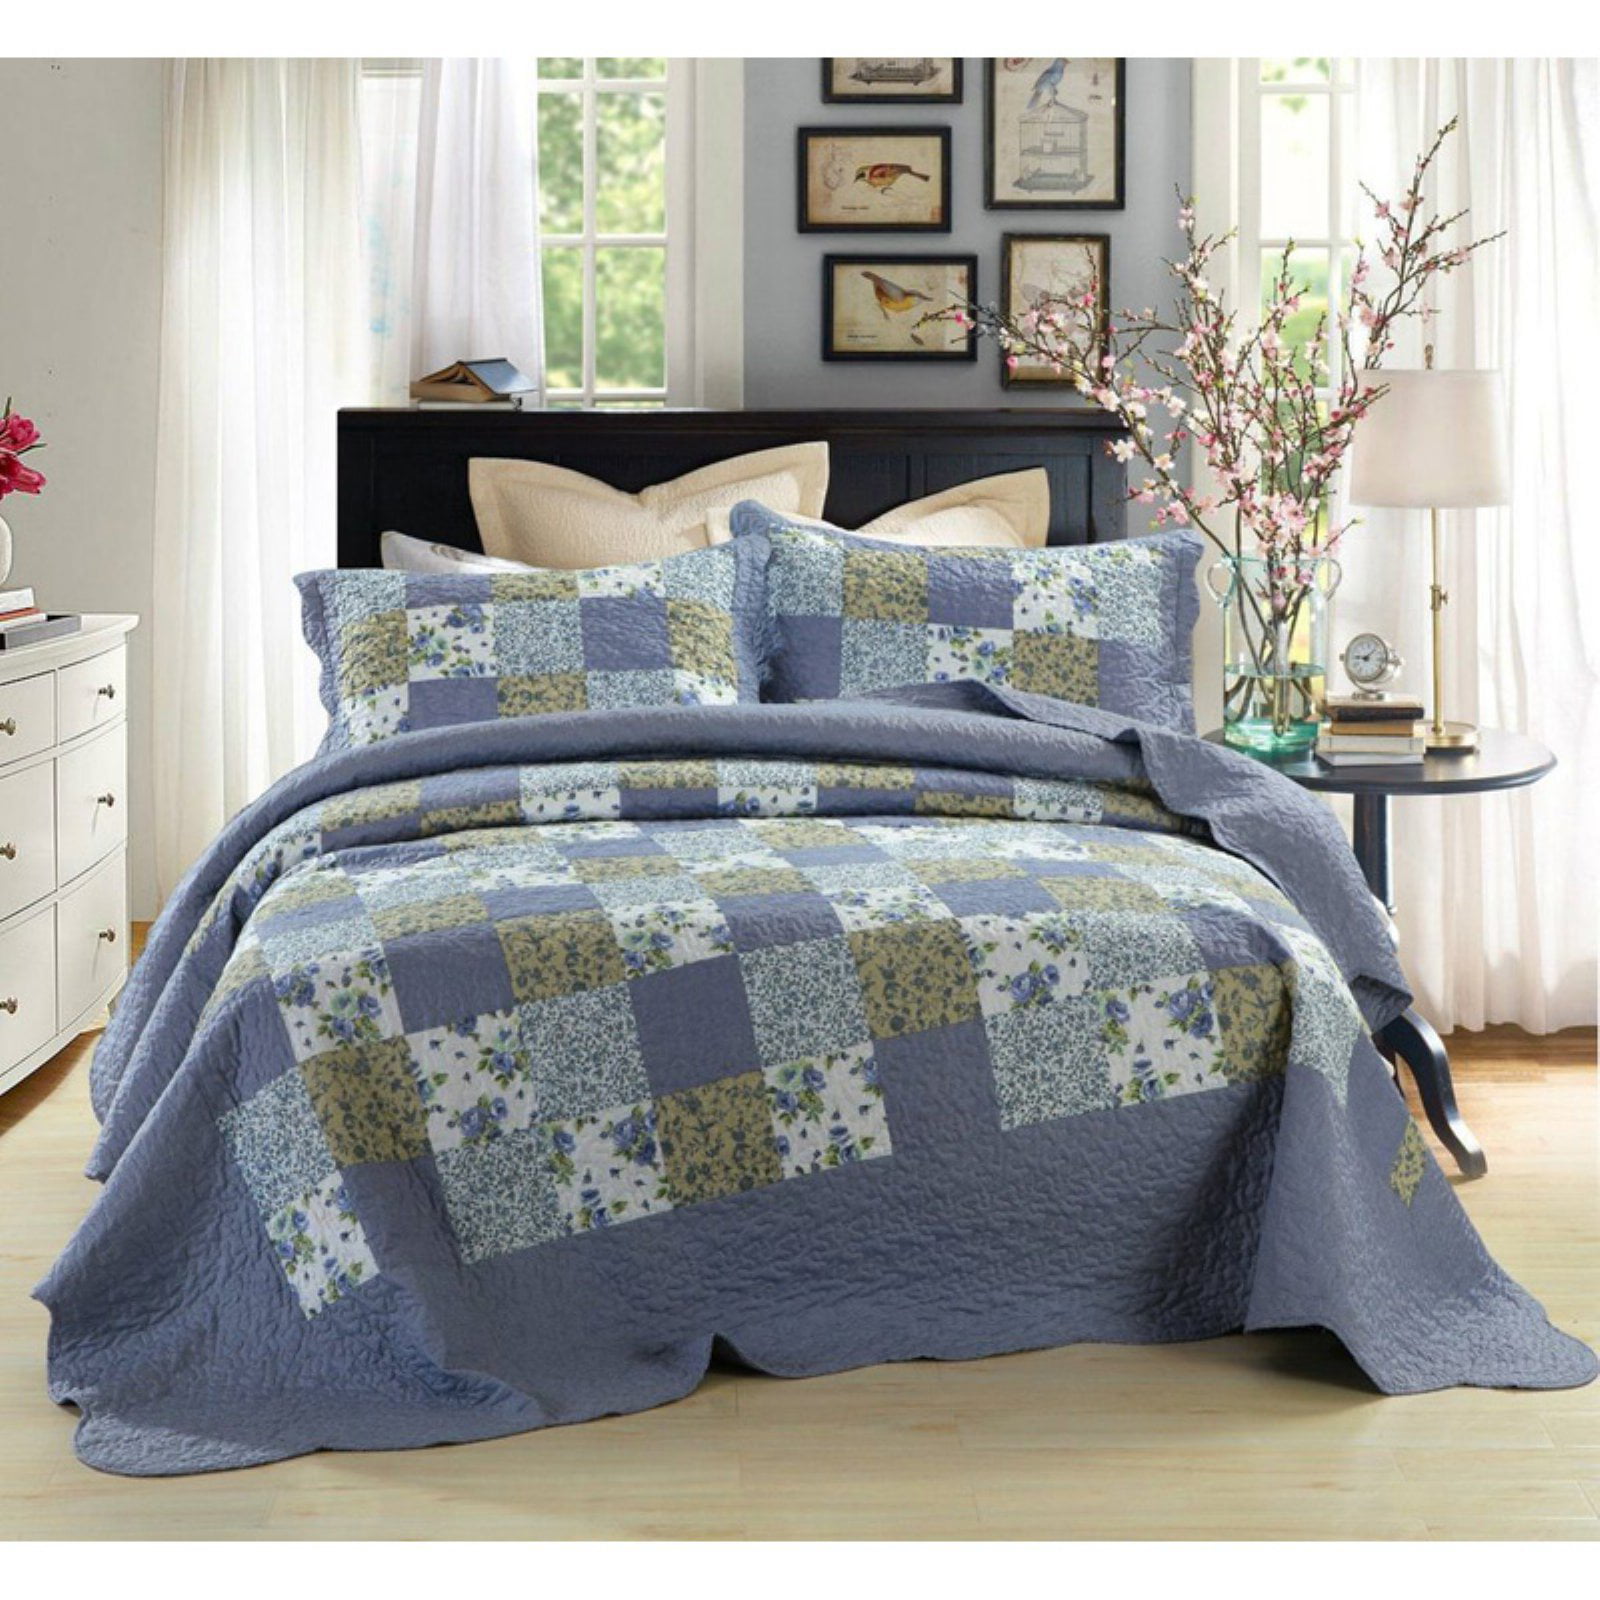 Queen Size Details about   DaDa Bedding Set of 2 Cotton Paisley Leaves Floral Gray Pillow Cases 